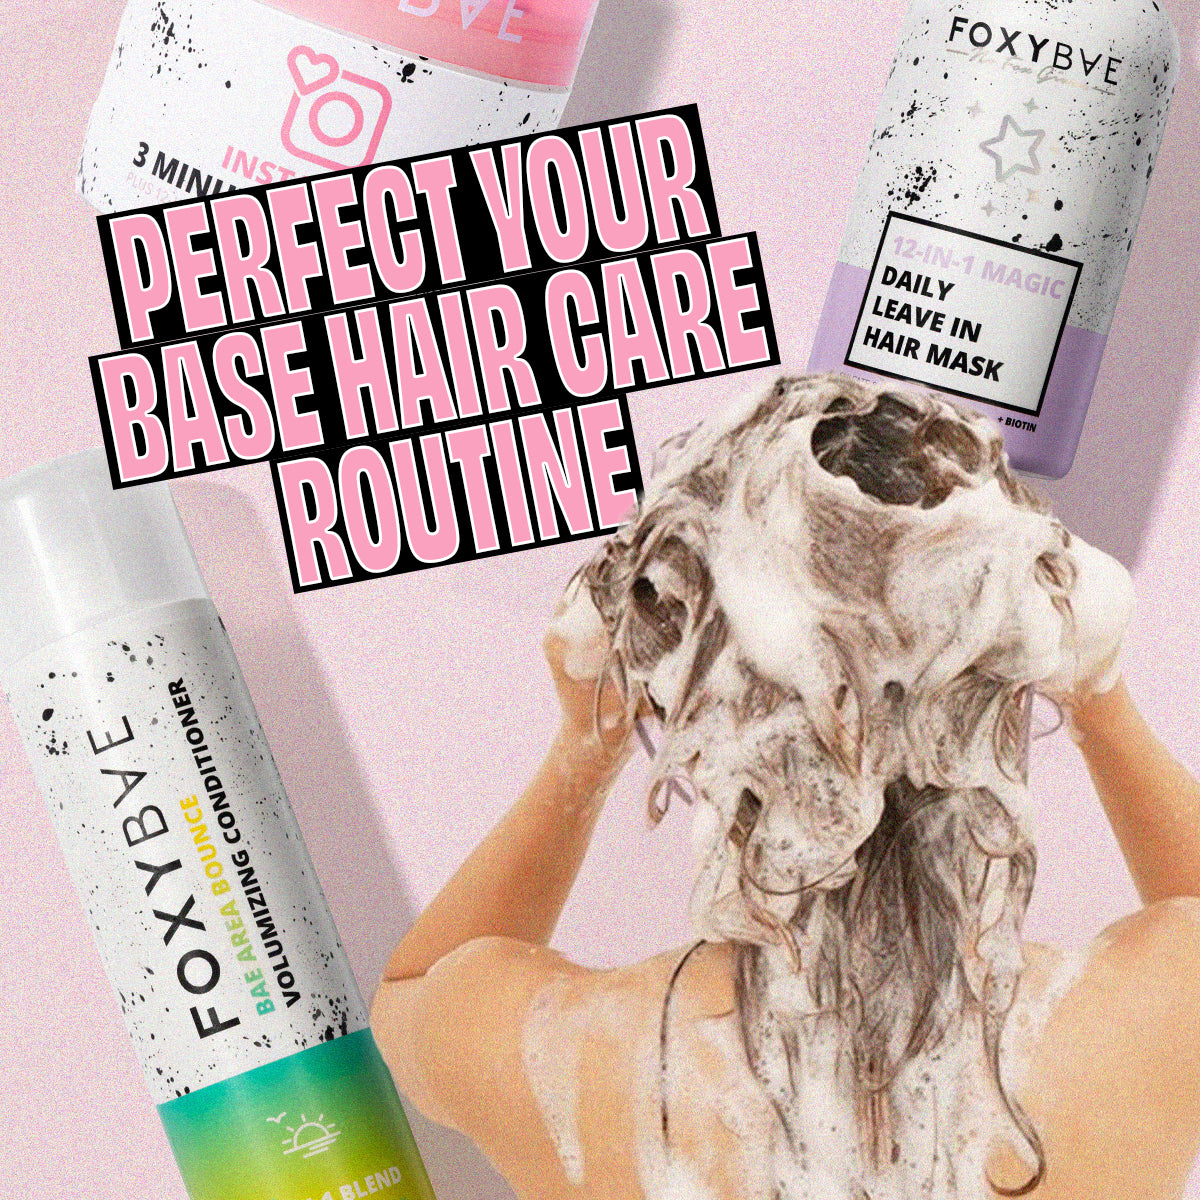 From Basic to Bombshell: The Ultimate Guide to Your Base Hair Care Routine featured image